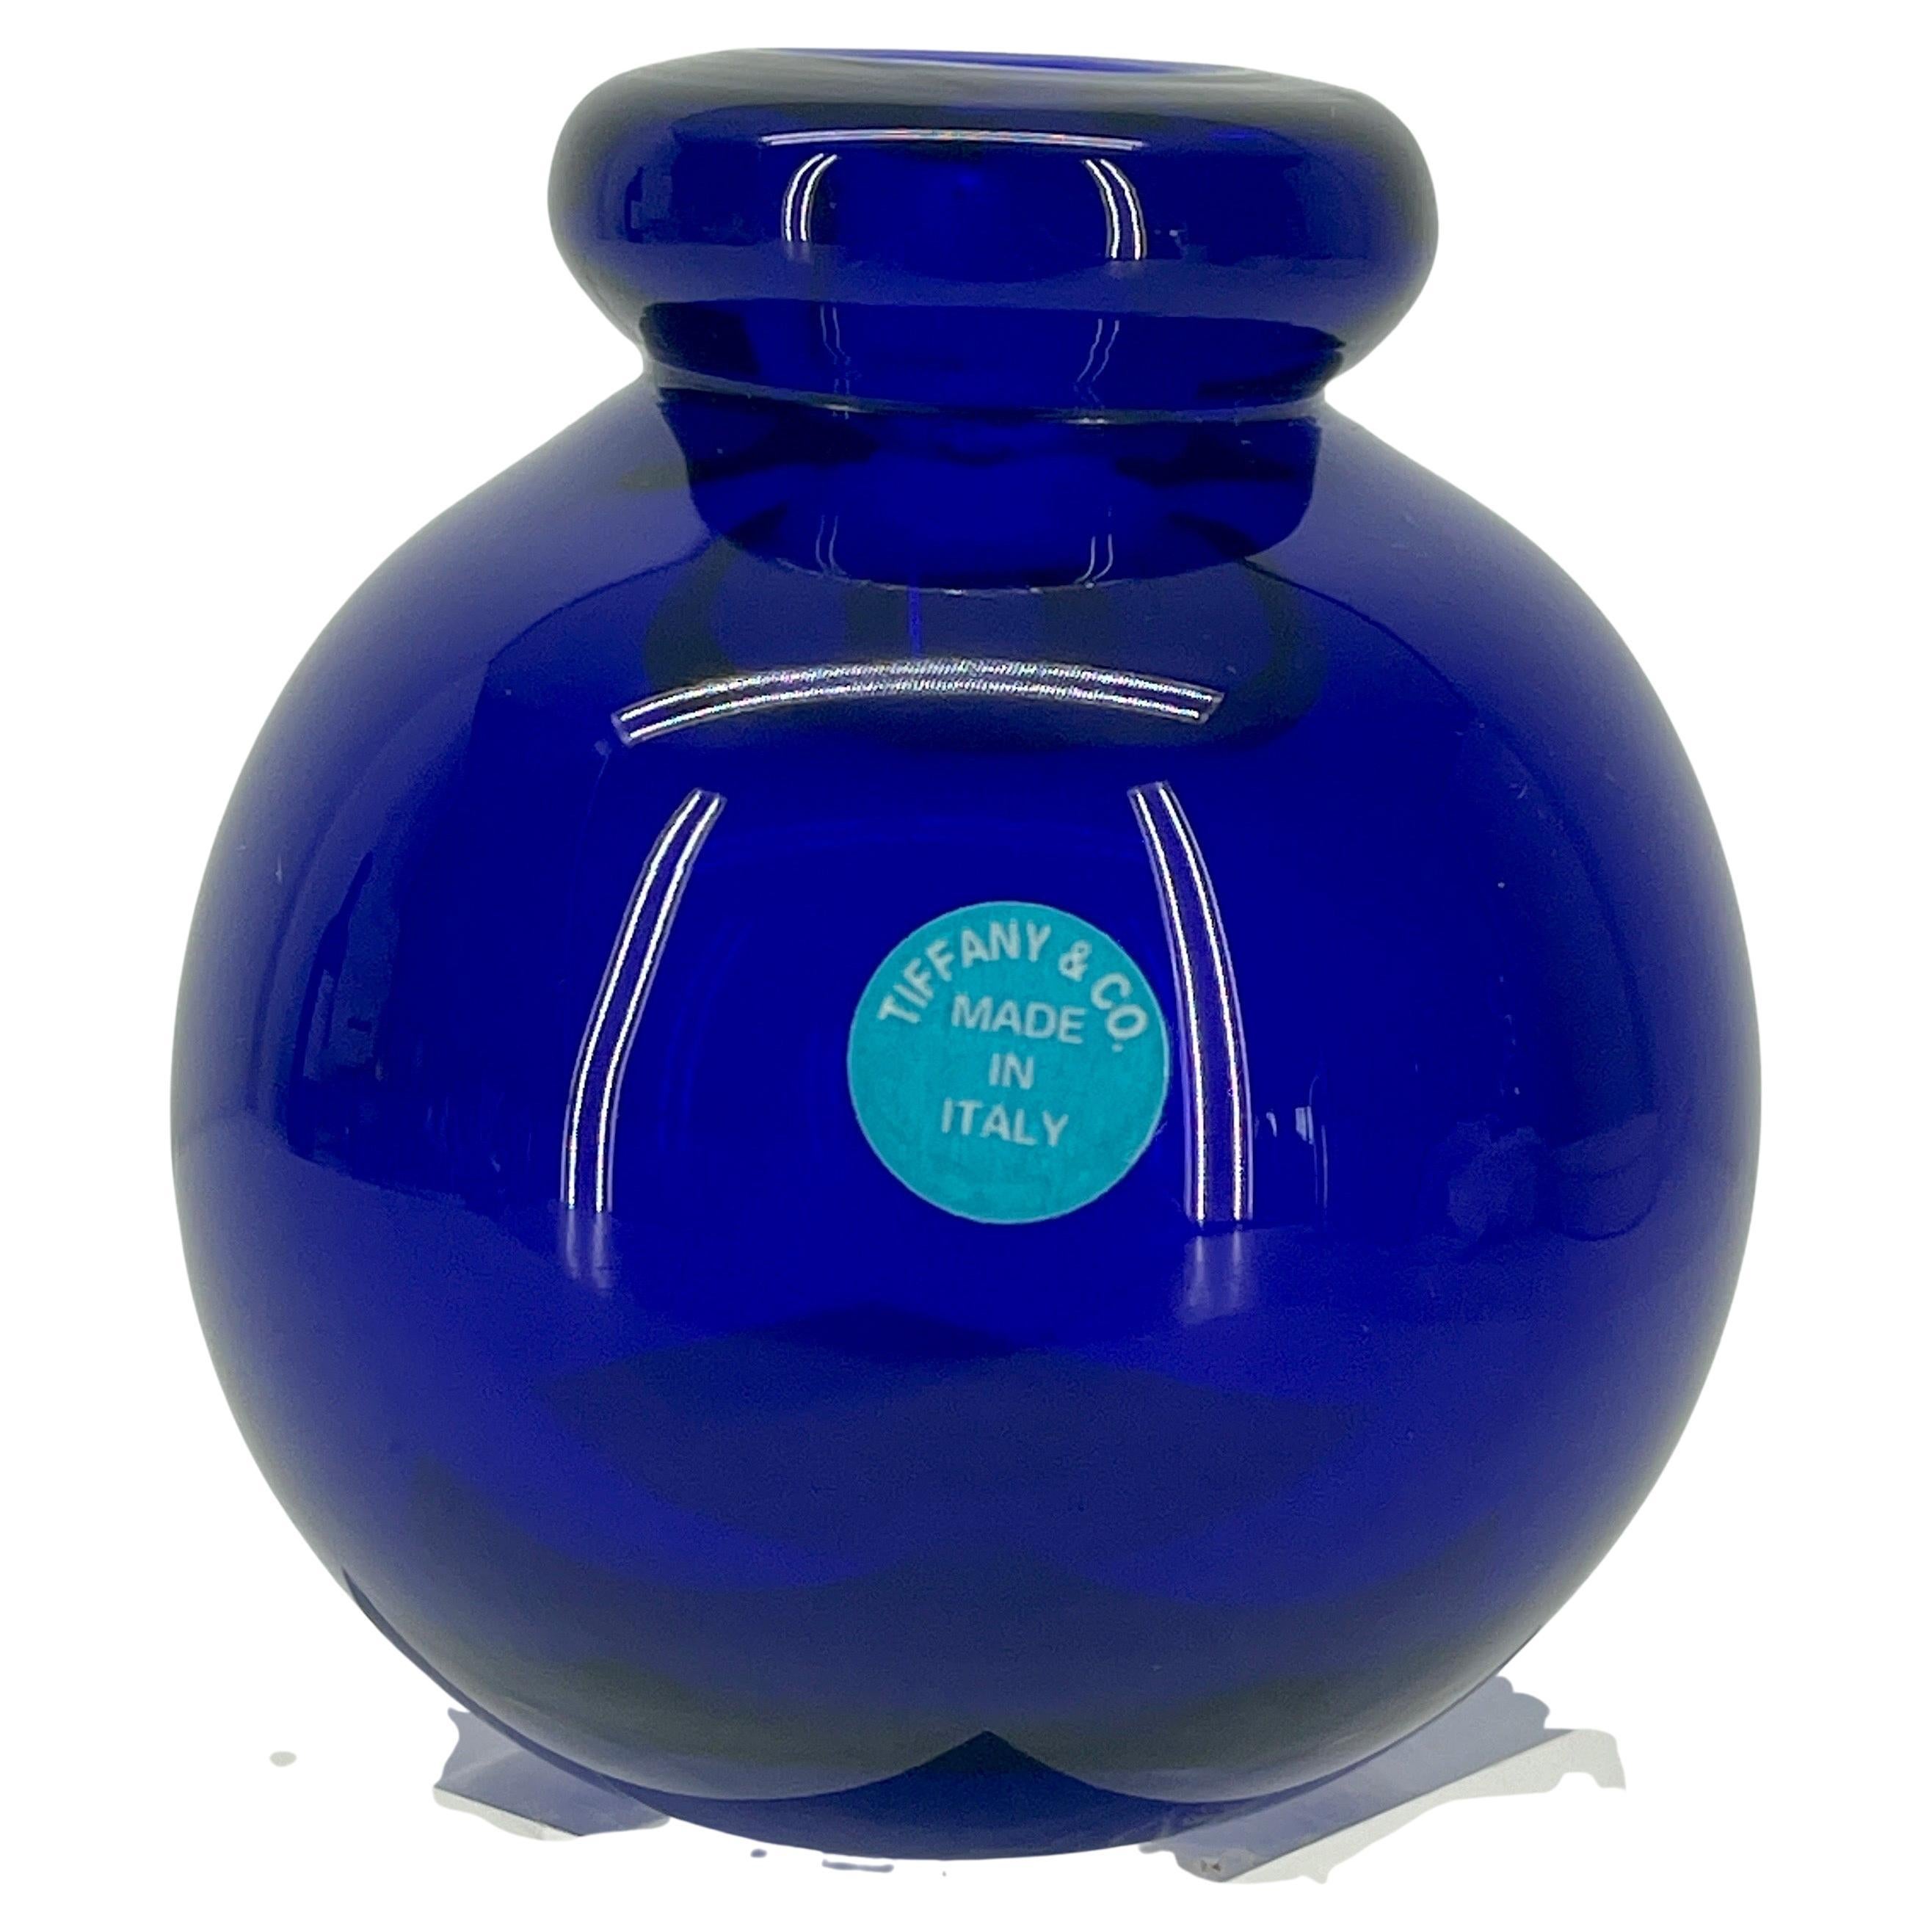 Small vintage Cobalt blue vase by Archimede Seguso of Murano for Tiffany, Italy, label still attached.